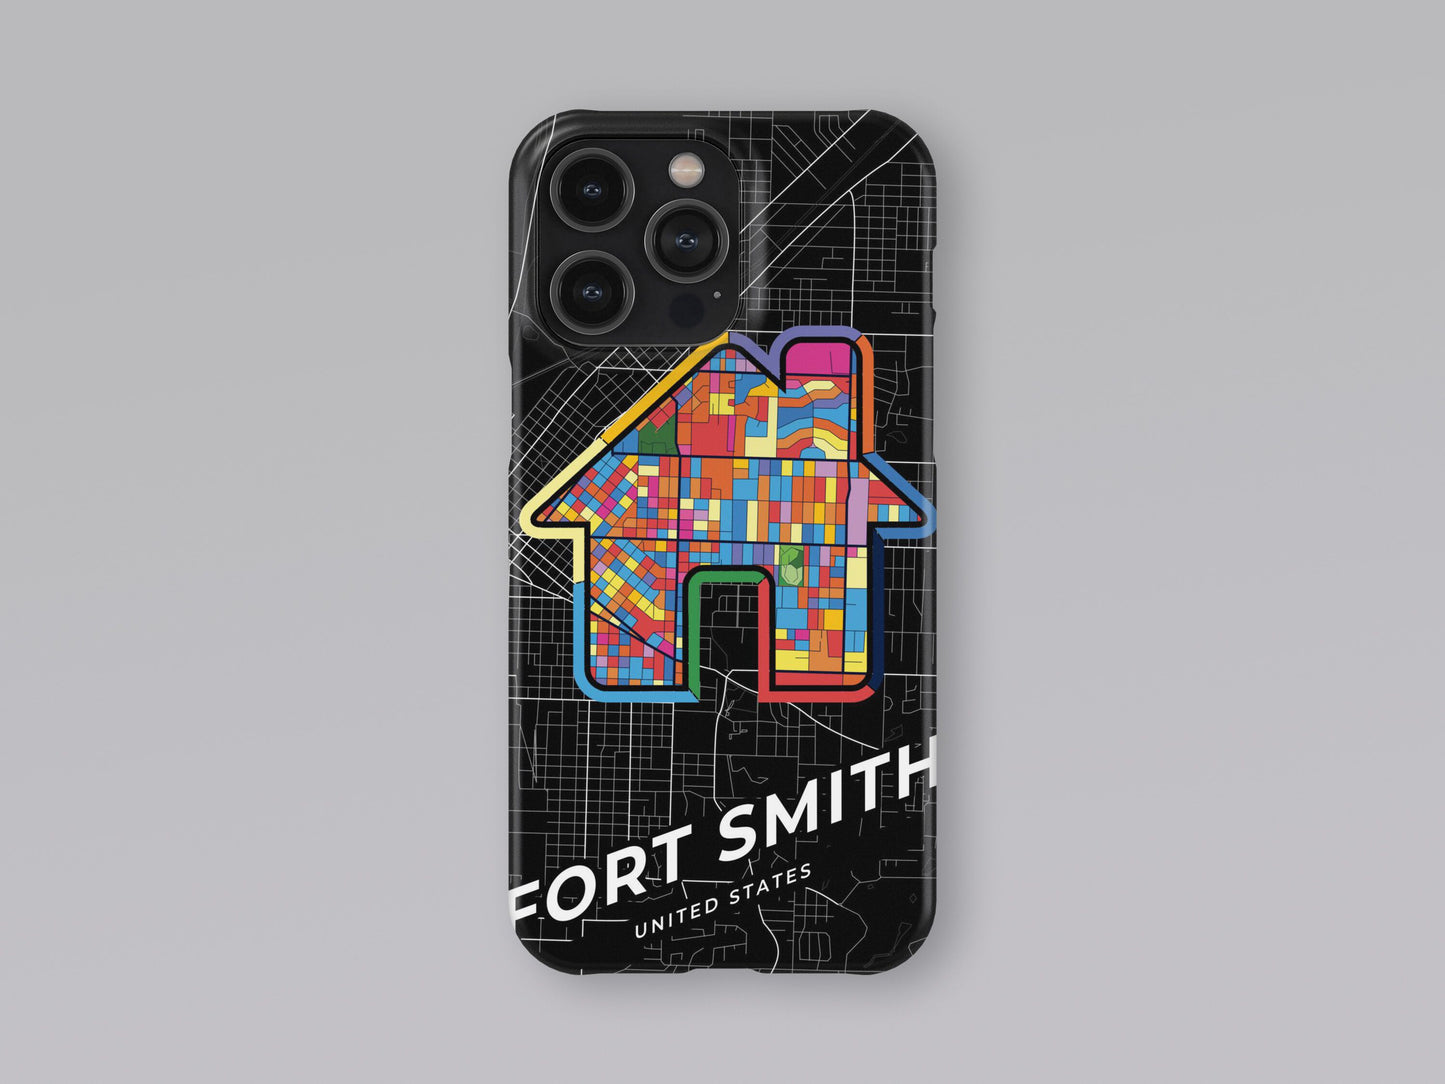 Fort Smith Arkansas slim phone case with colorful icon. Birthday, wedding or housewarming gift. Couple match cases. 3